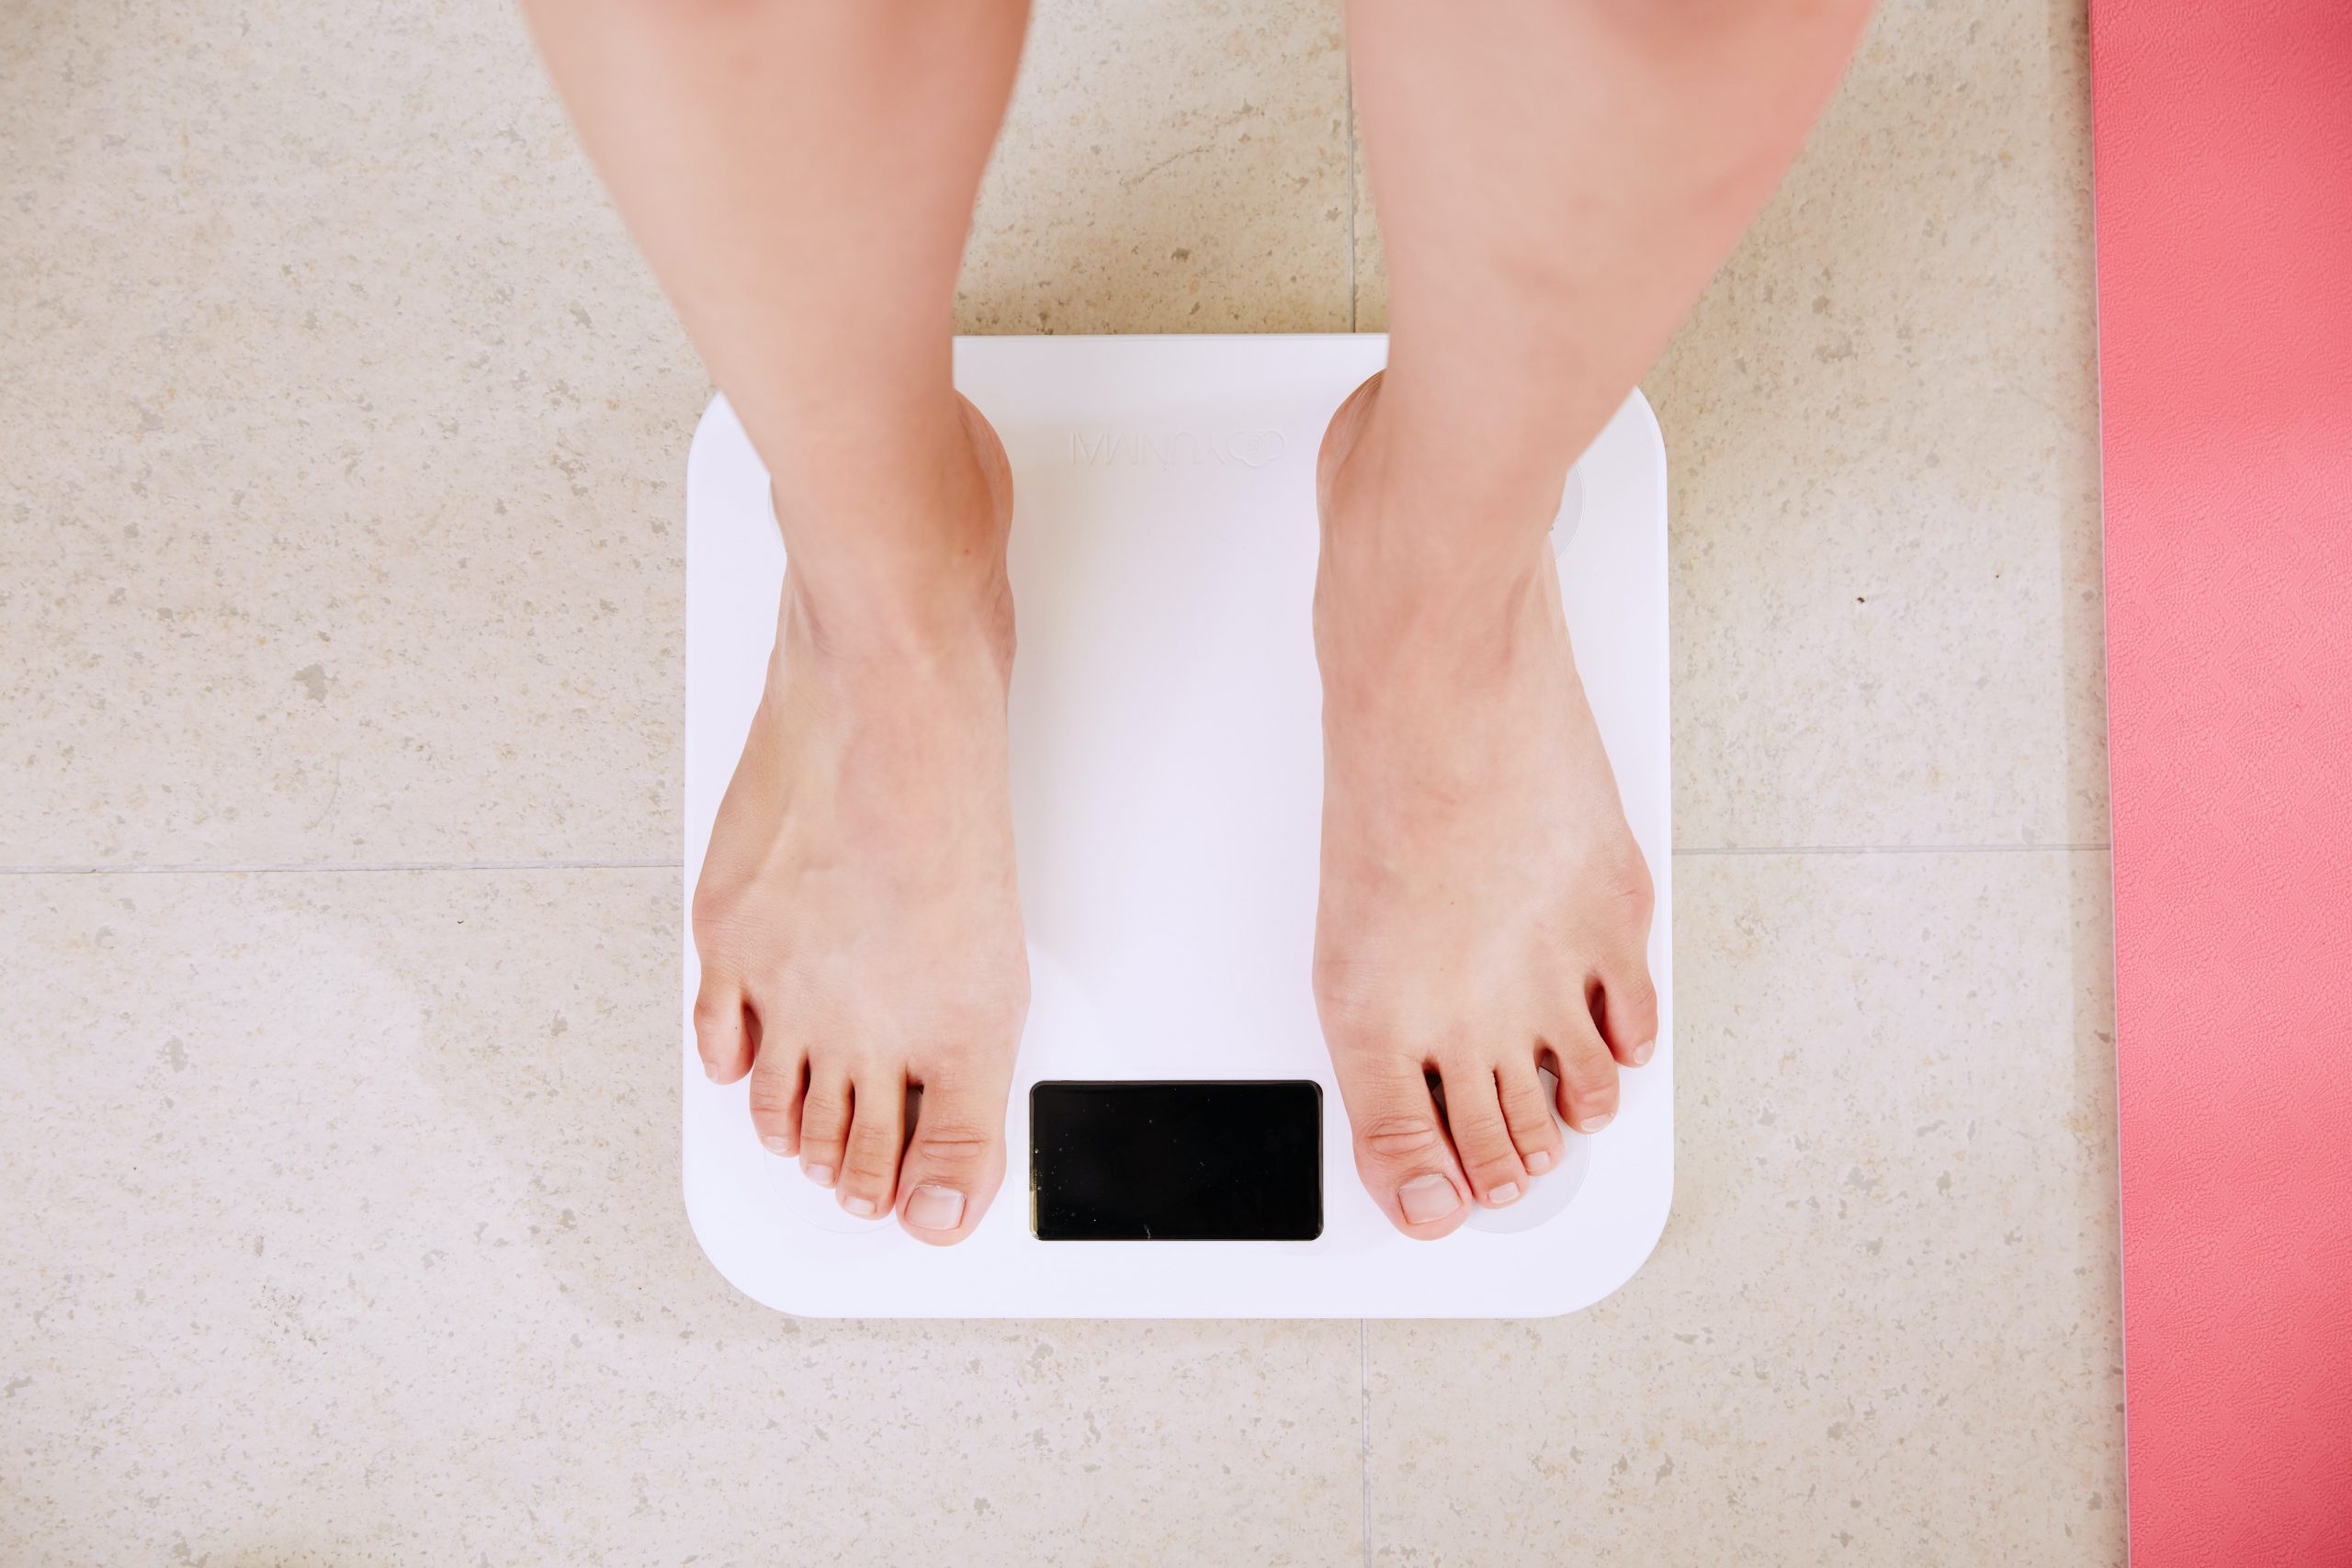 Here’s How a Sudden Loss of Weight Could Lead to a Liver Problem